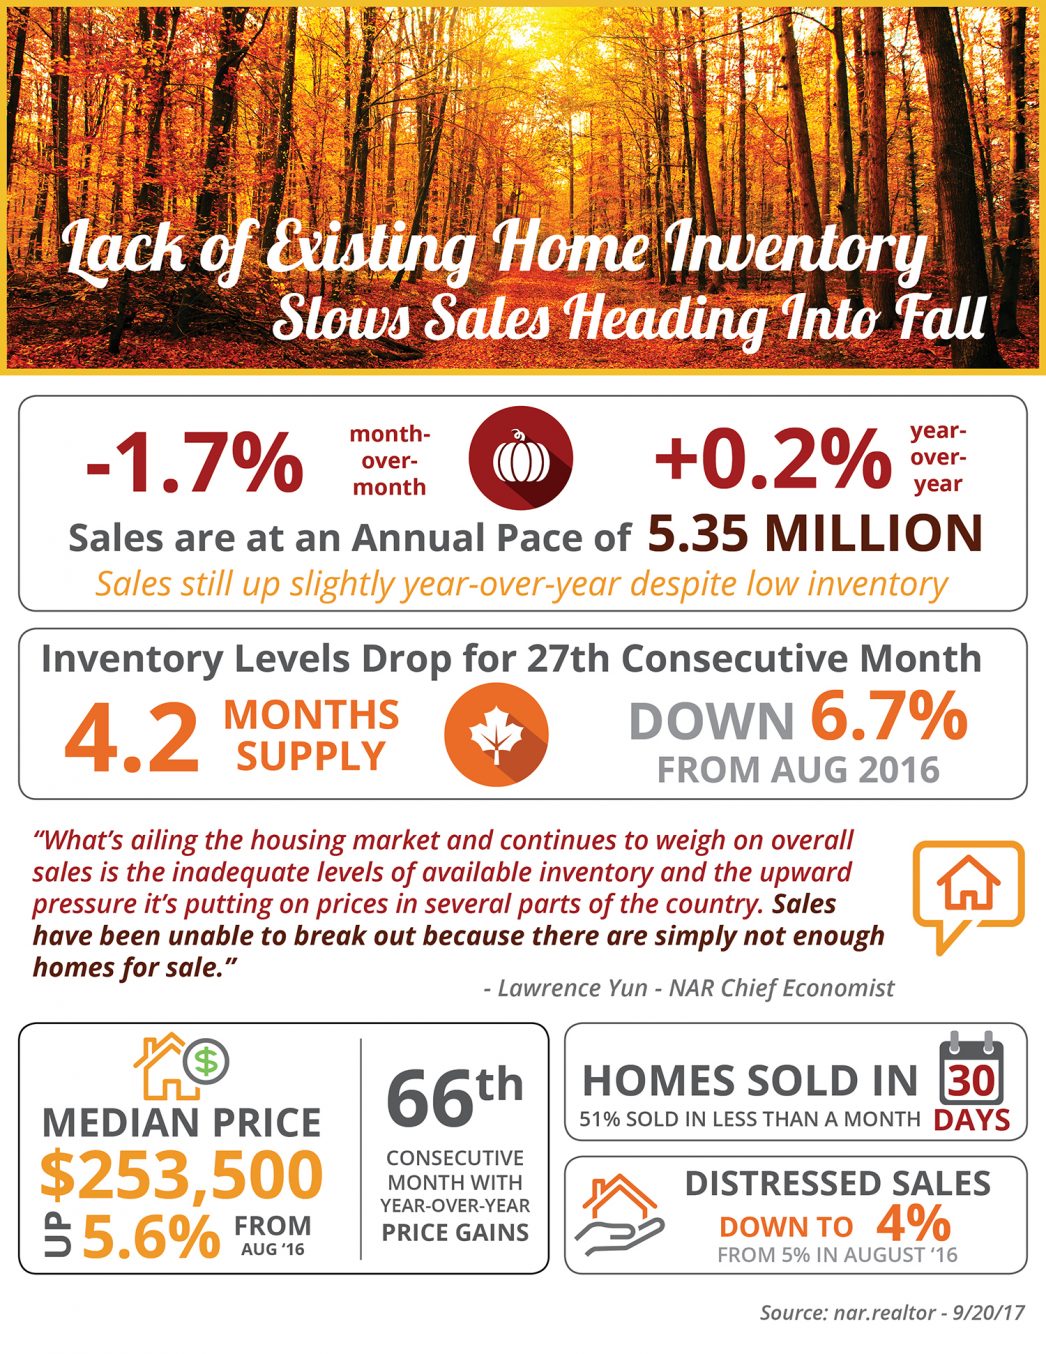 Lack of Existing Home Investory Slows Sales Heading into Fall [INFOGRAPHIC]